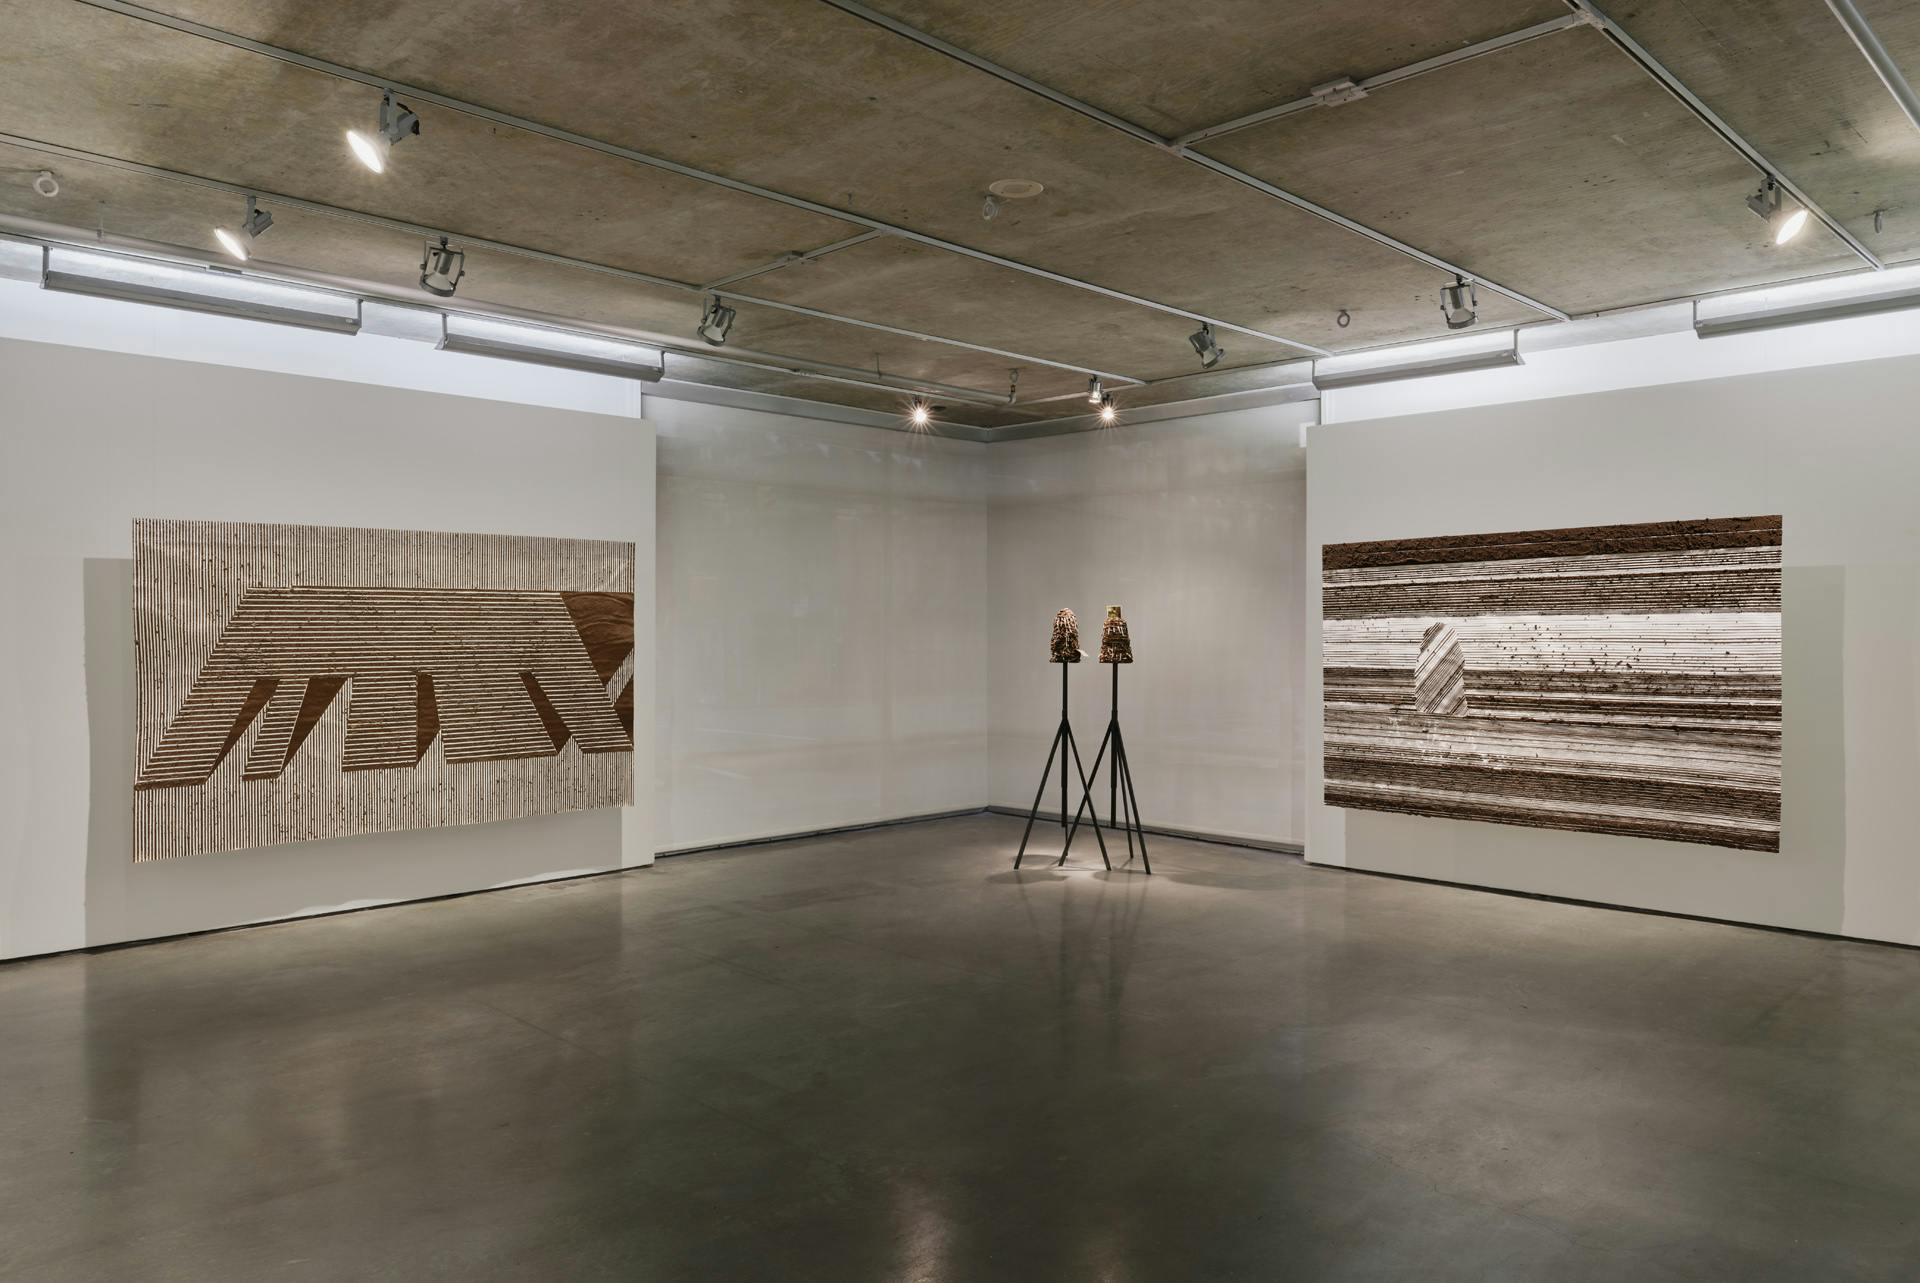 Three large scale drawings made of adobe mud and paper are suspended against the corner walls of a gallery space. In the middle sits a sculpture consisting of two mound-like forms on tripod stands.